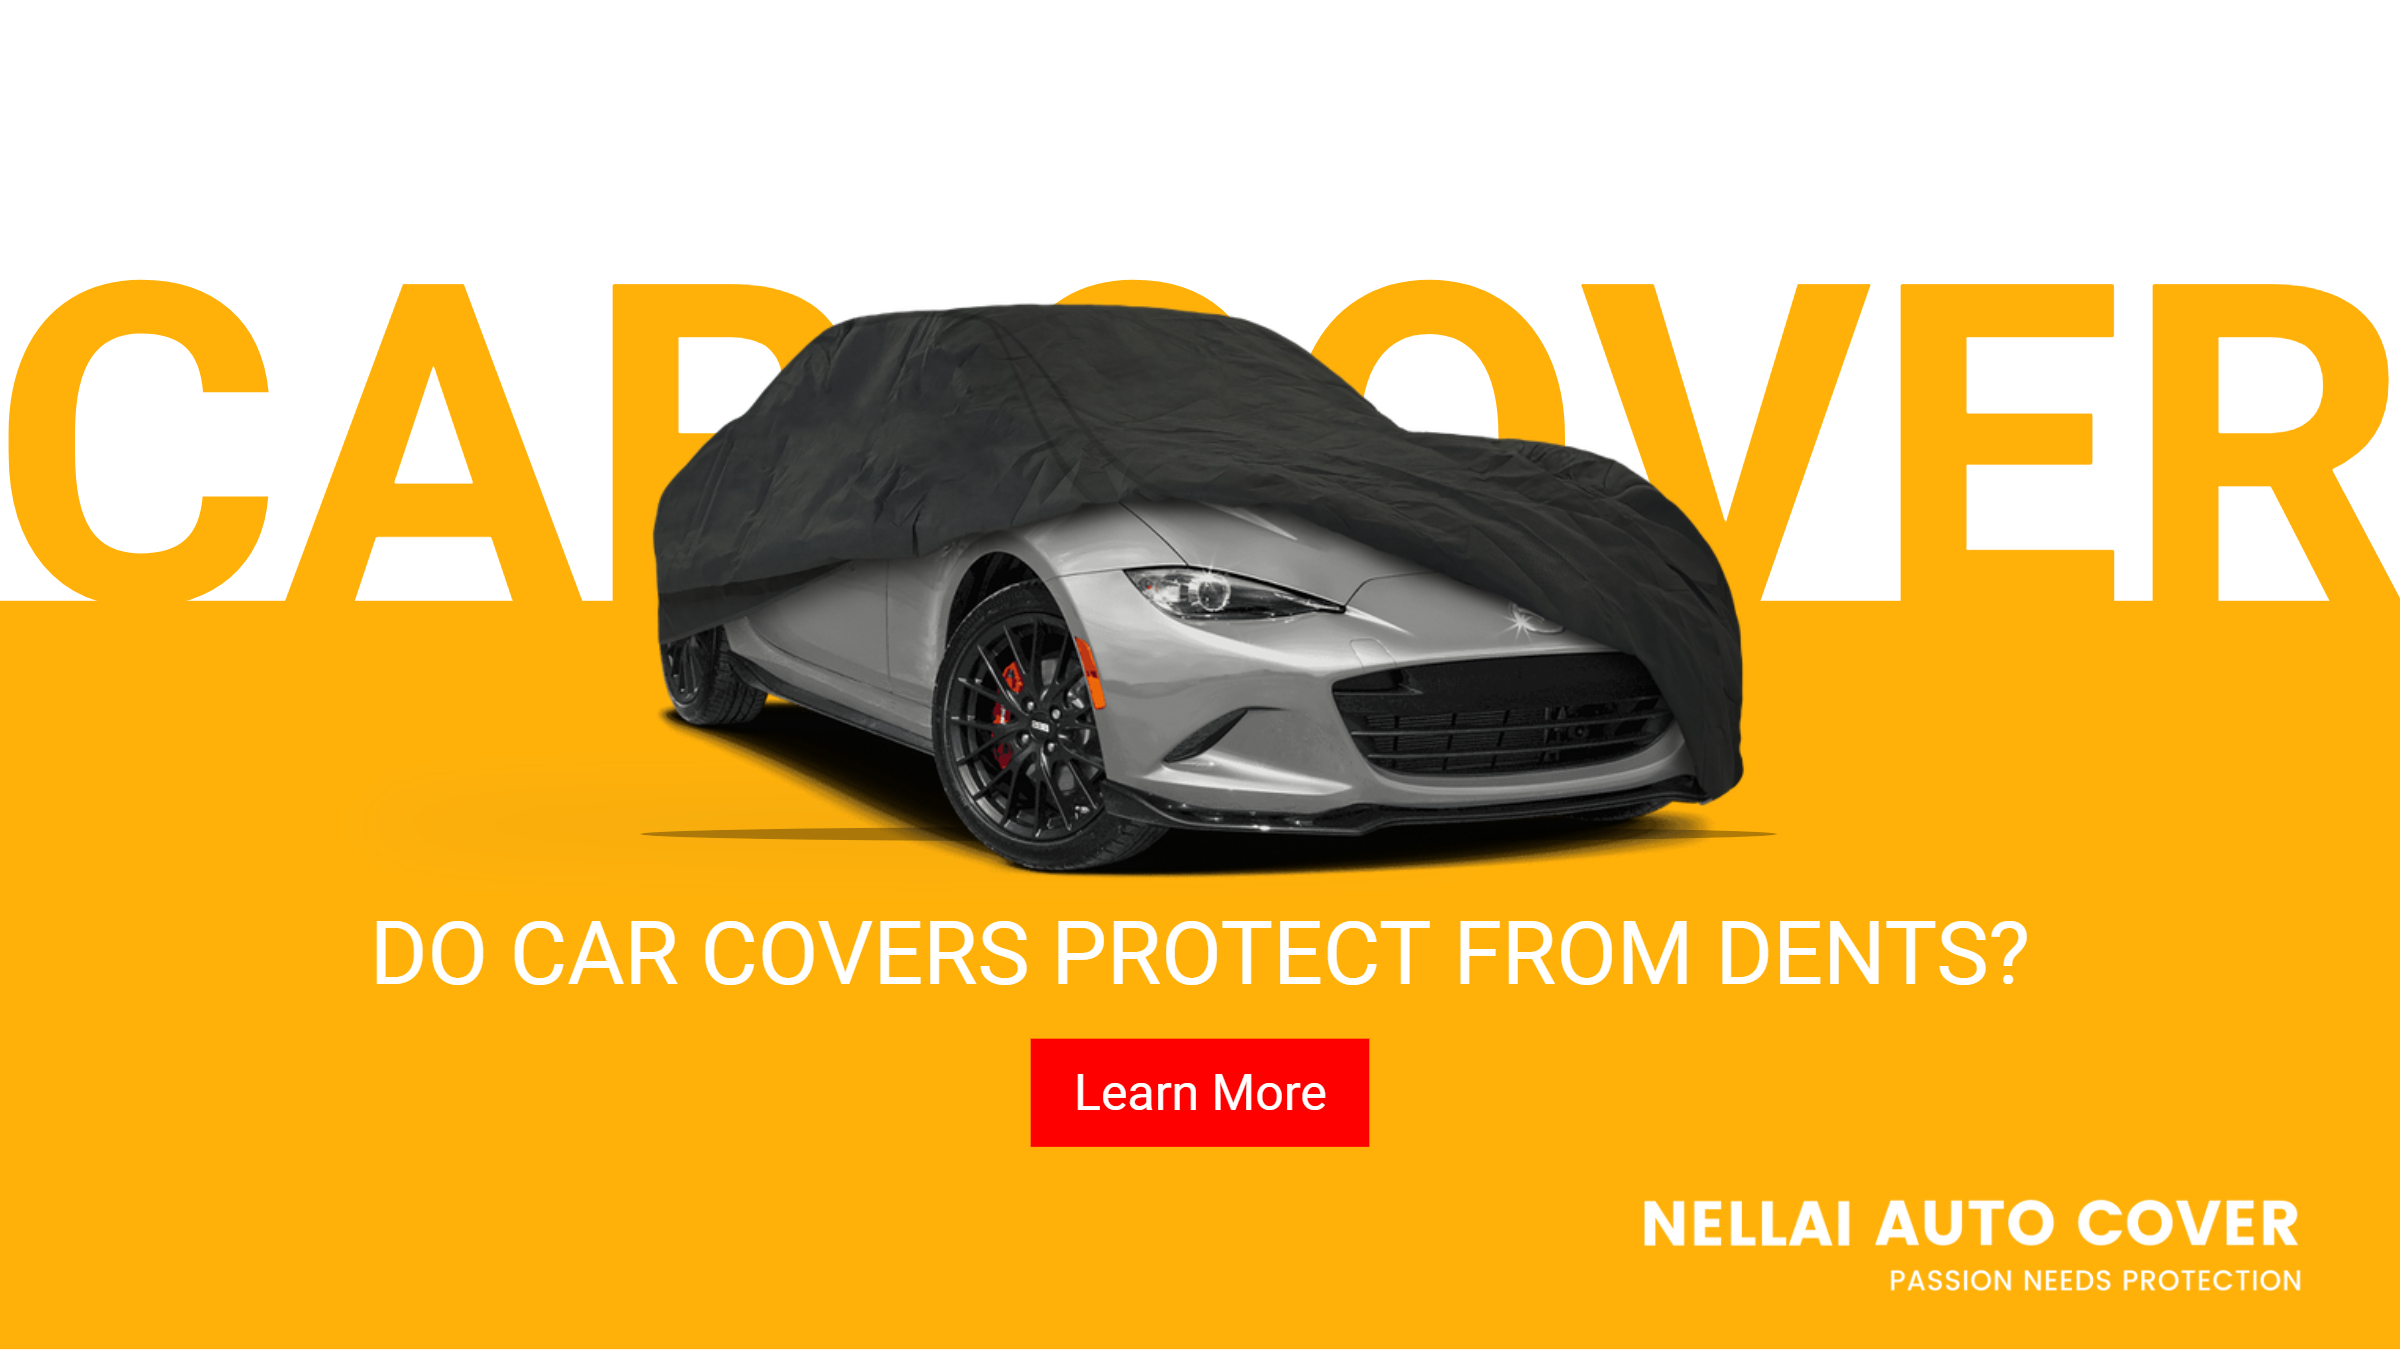 Do car covers protect from dents?